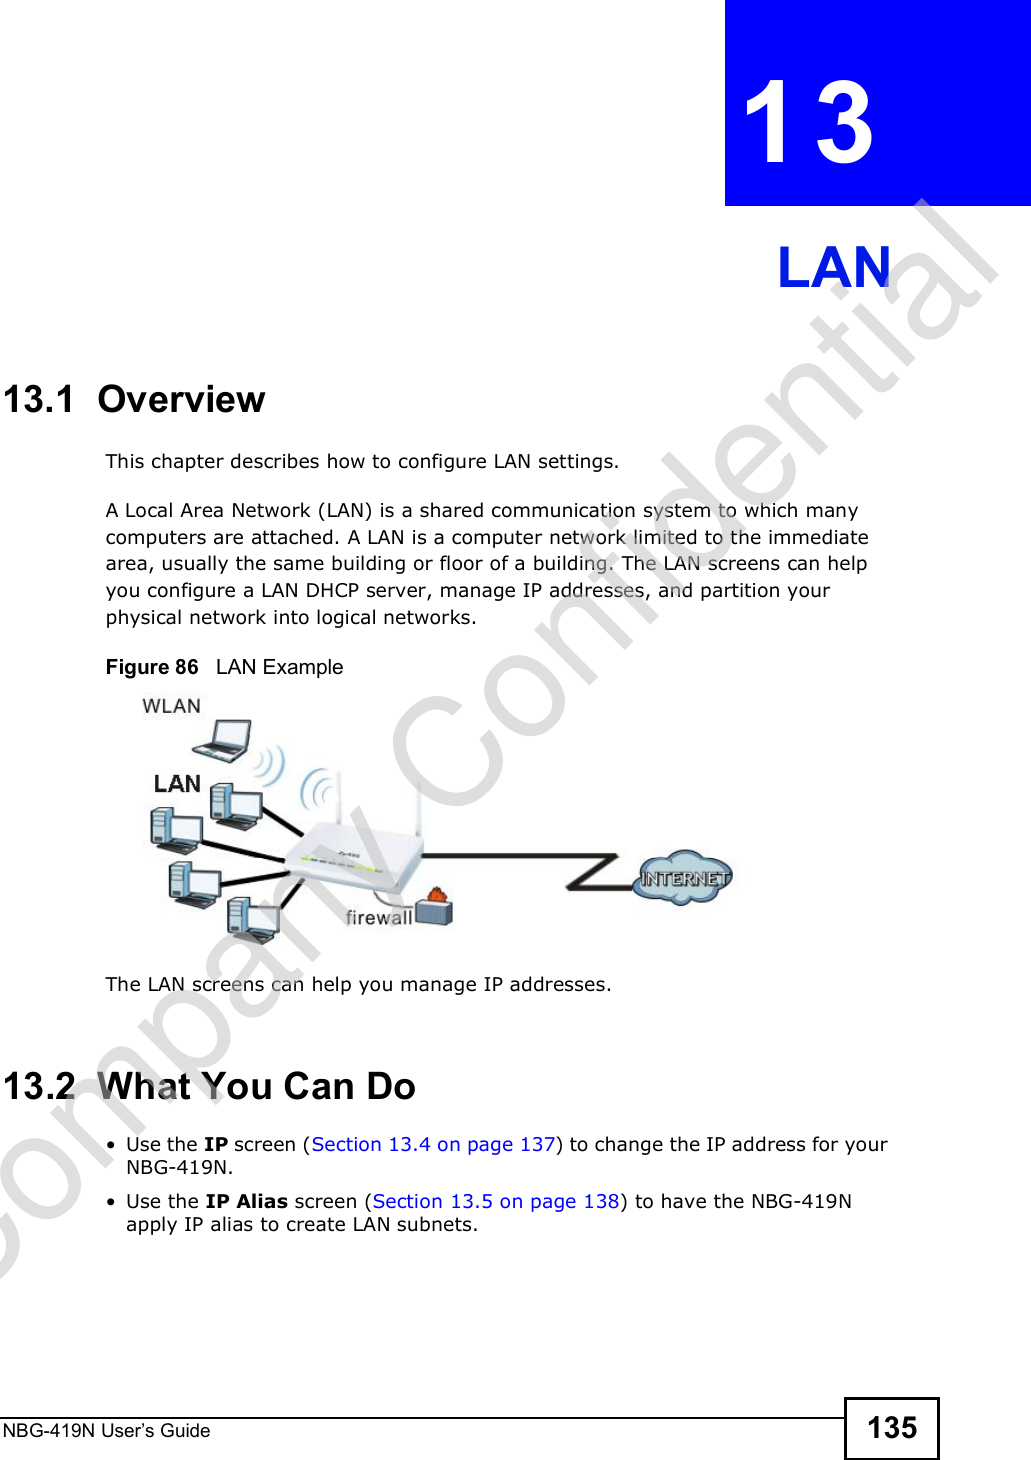 NBG-419N User s Guide 135CHAPTER  13 LAN13.1  OverviewThis chapter describes how to configure LAN settings.A Local Area Network (LAN) is a shared communication system to which many computers are attached. A LAN is a computer network limited to the immediate area, usually the same building or floor of a building. The LAN screens can help you configure a LAN DHCP server, manage IP addresses, and partition your physical network into logical networks.Figure 86   LAN ExampleThe LAN screens can help you manage IP addresses.13.2  What You Can Do Use the IP screen (Section 13.4 on page 137) to change the IP address for your NBG-419N. Use the IP Alias screen (Section 13.5 on page 138) to have the NBG-419N apply IP alias to create LAN subnets.Company Confidential